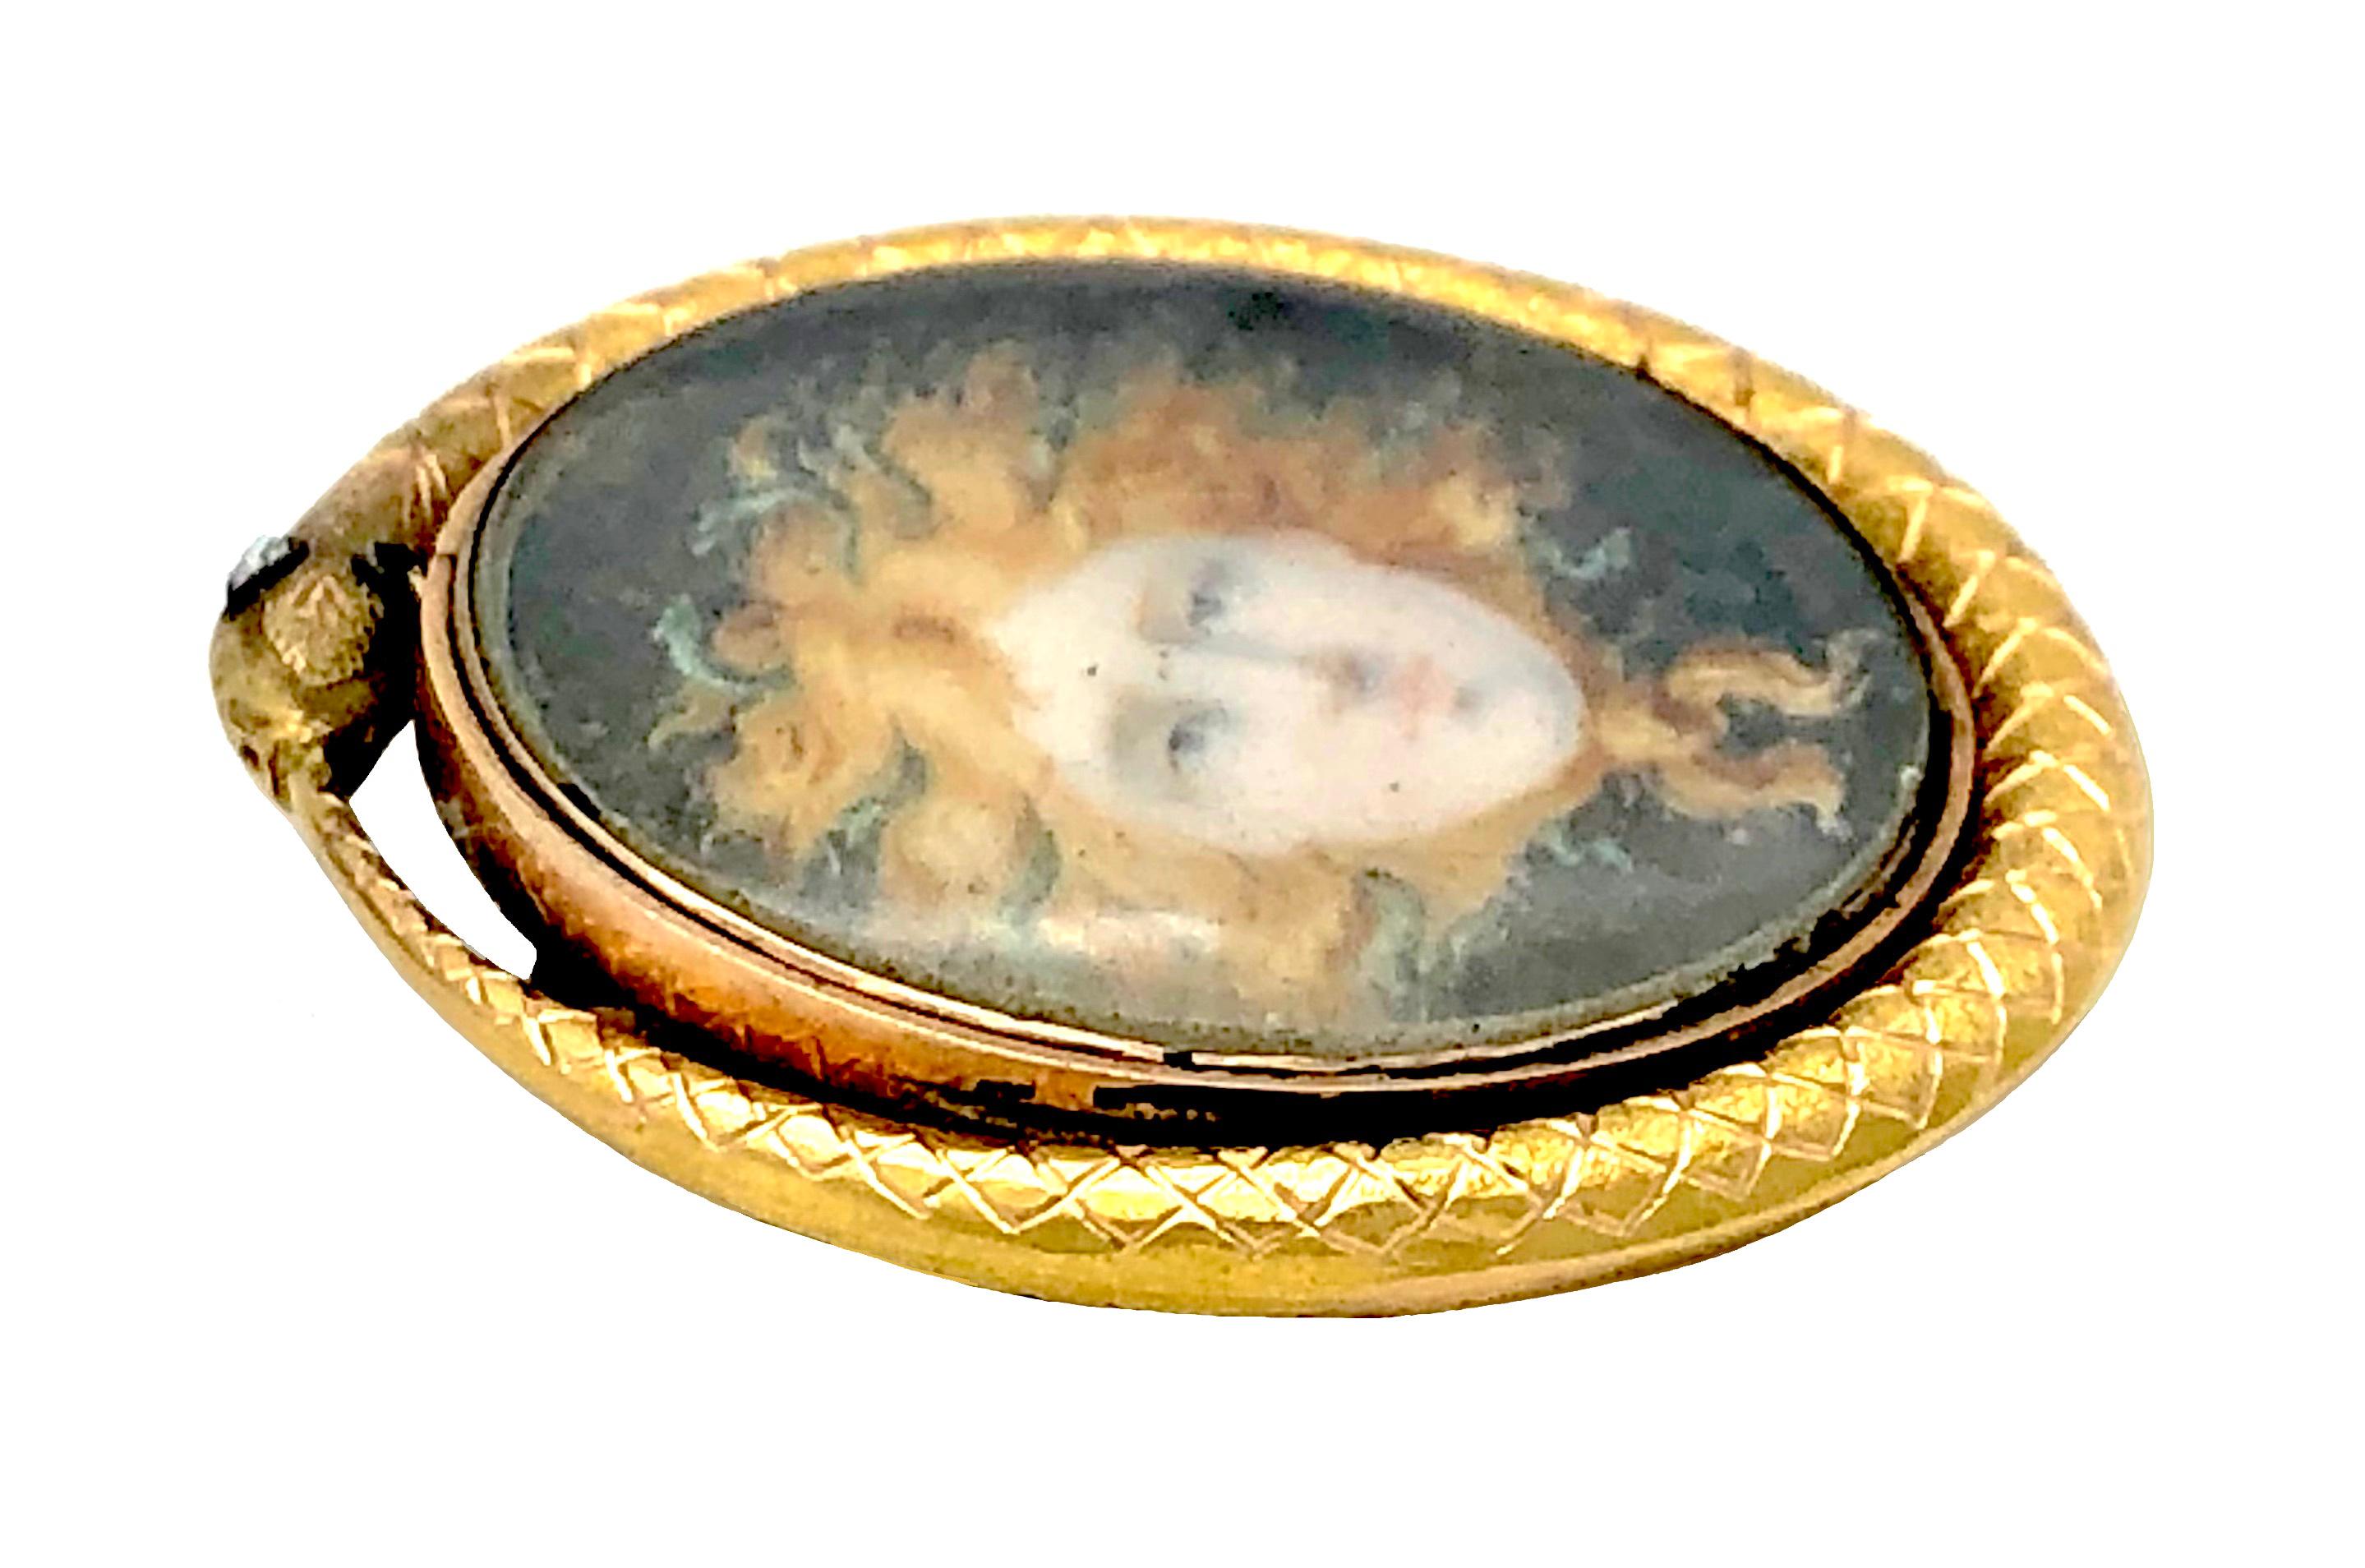 This beautiful gold mounted painting of a medusa's head has been painted on porcelain around 1800. The snake with it's silverset diamond eyes is biting it's own tail, a symbol for eternity.